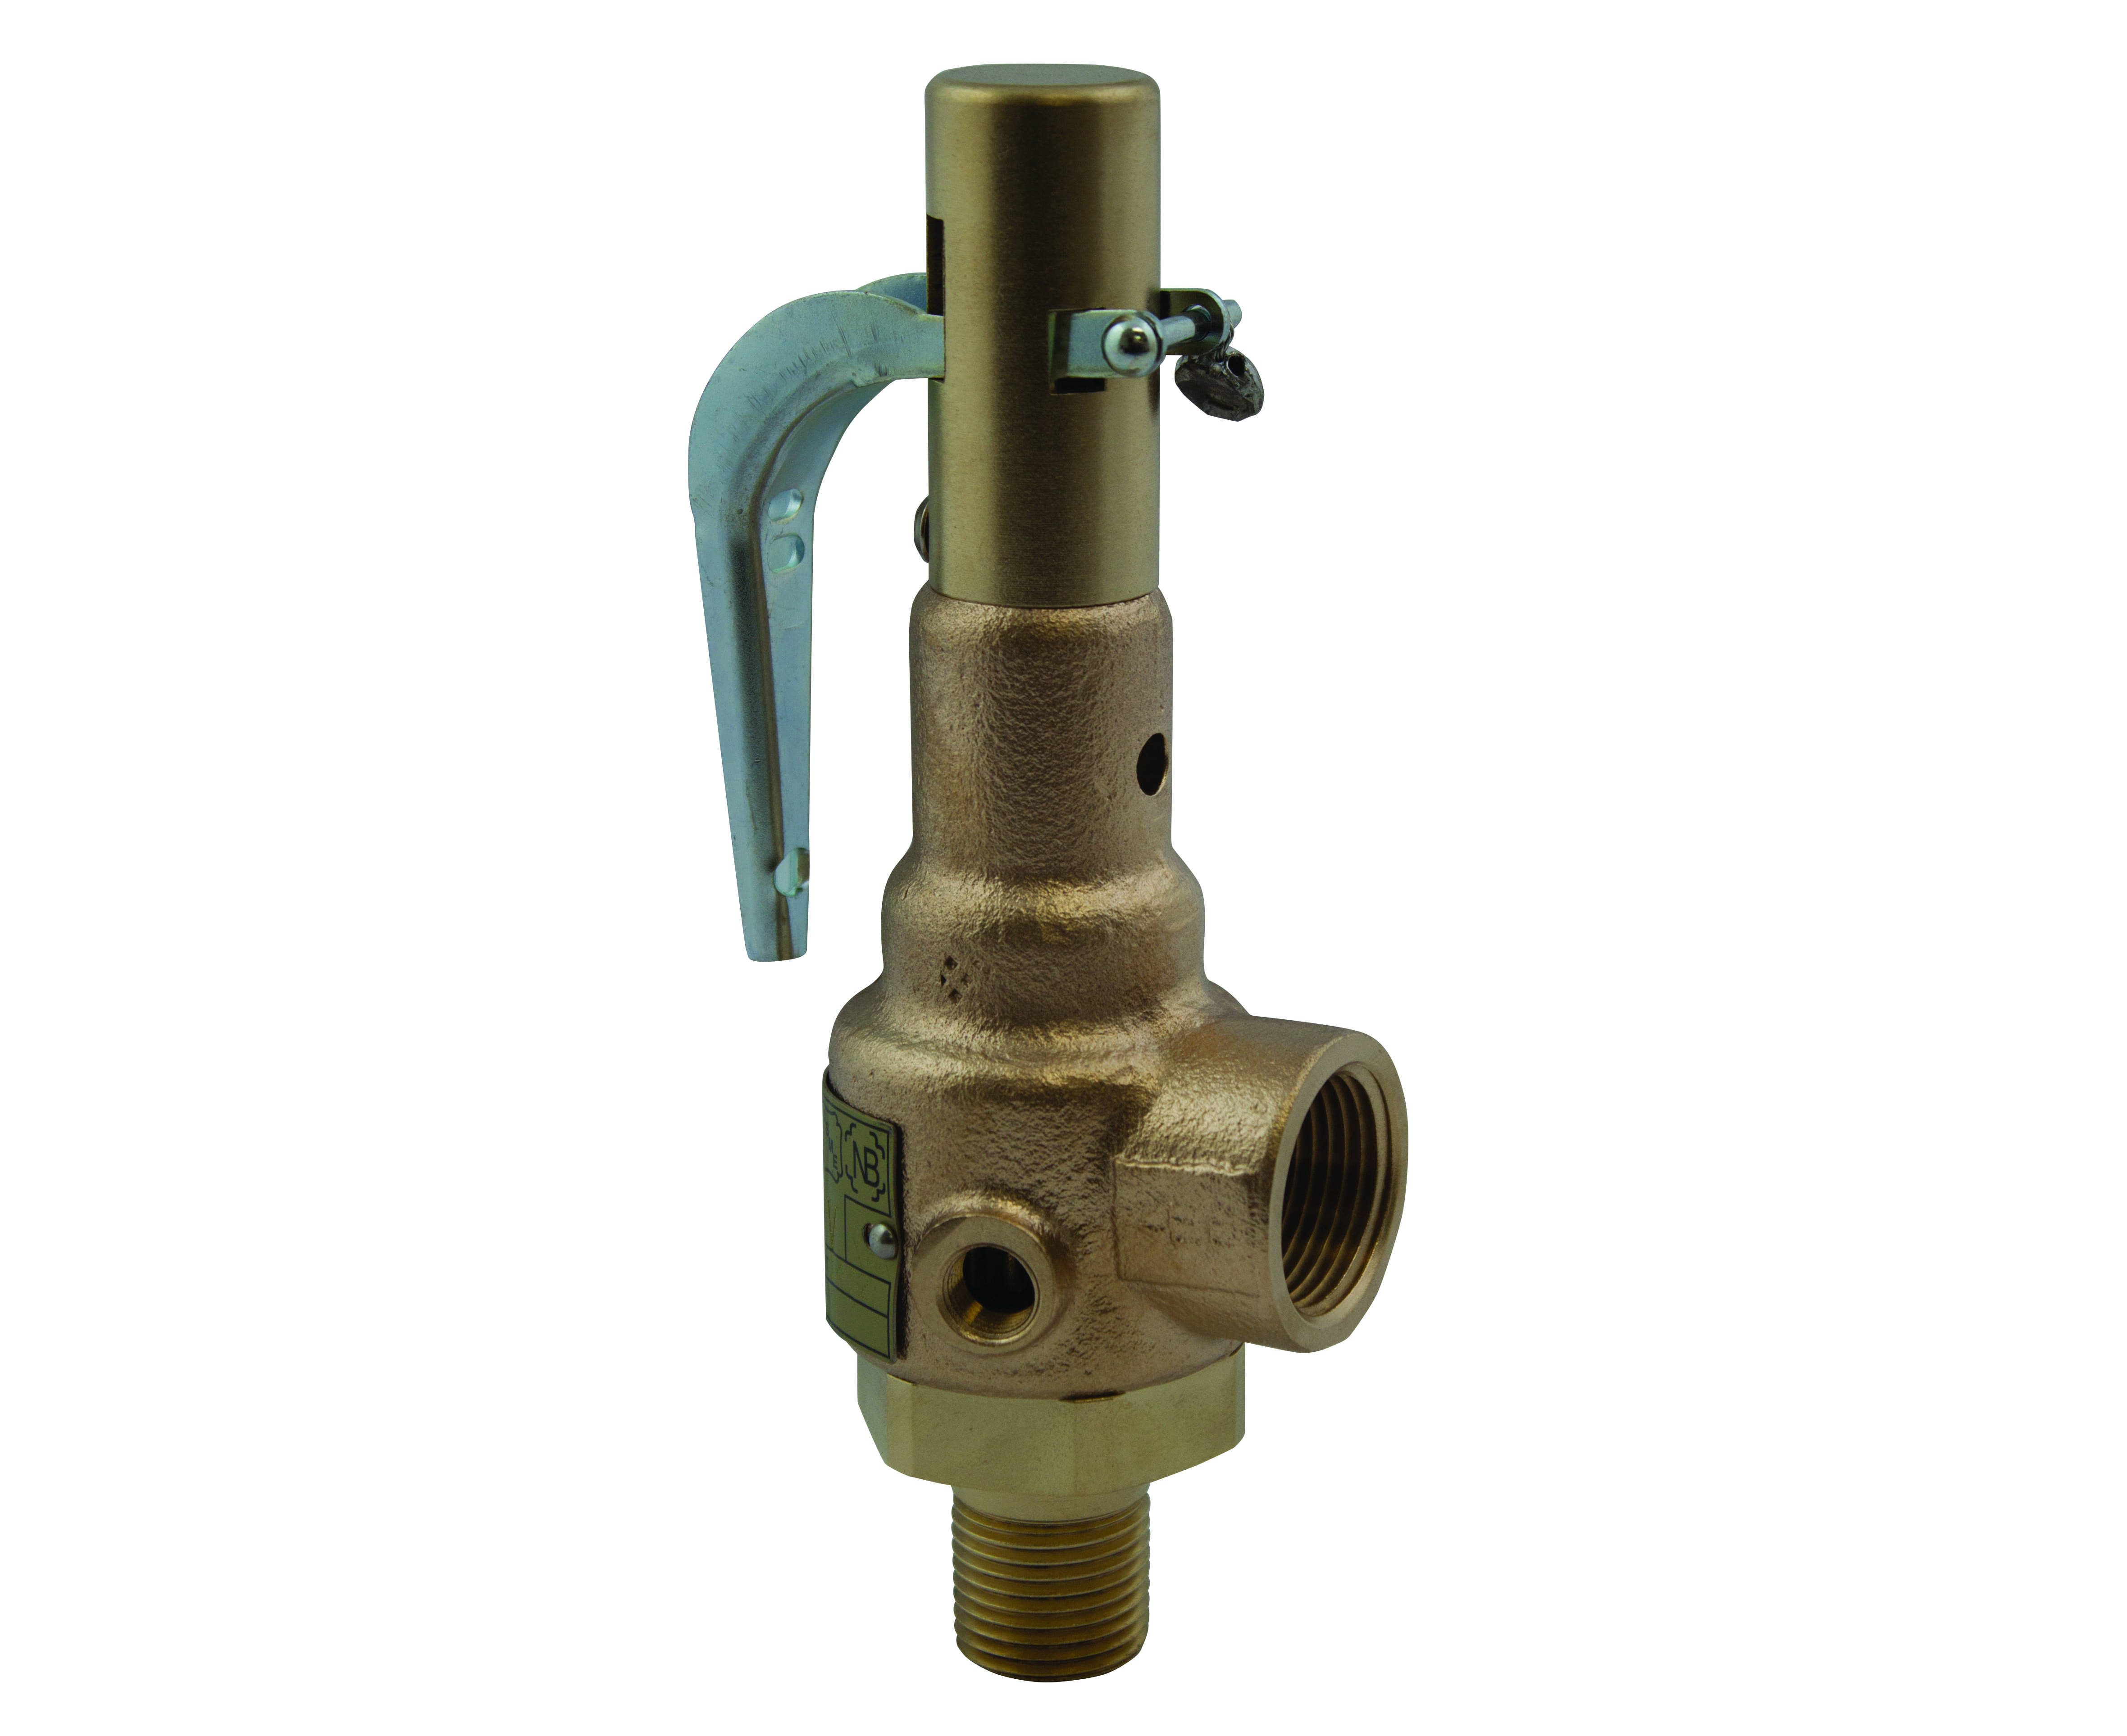 Preview image for Apollo ASME Sec I Steam Bronze Safety Relief Valves with Brass Trim, Teflon Seat, Performance Test Reports Included, SPL Tag, 1-1/4" x 1-1/2" (MNPT x FNPT)